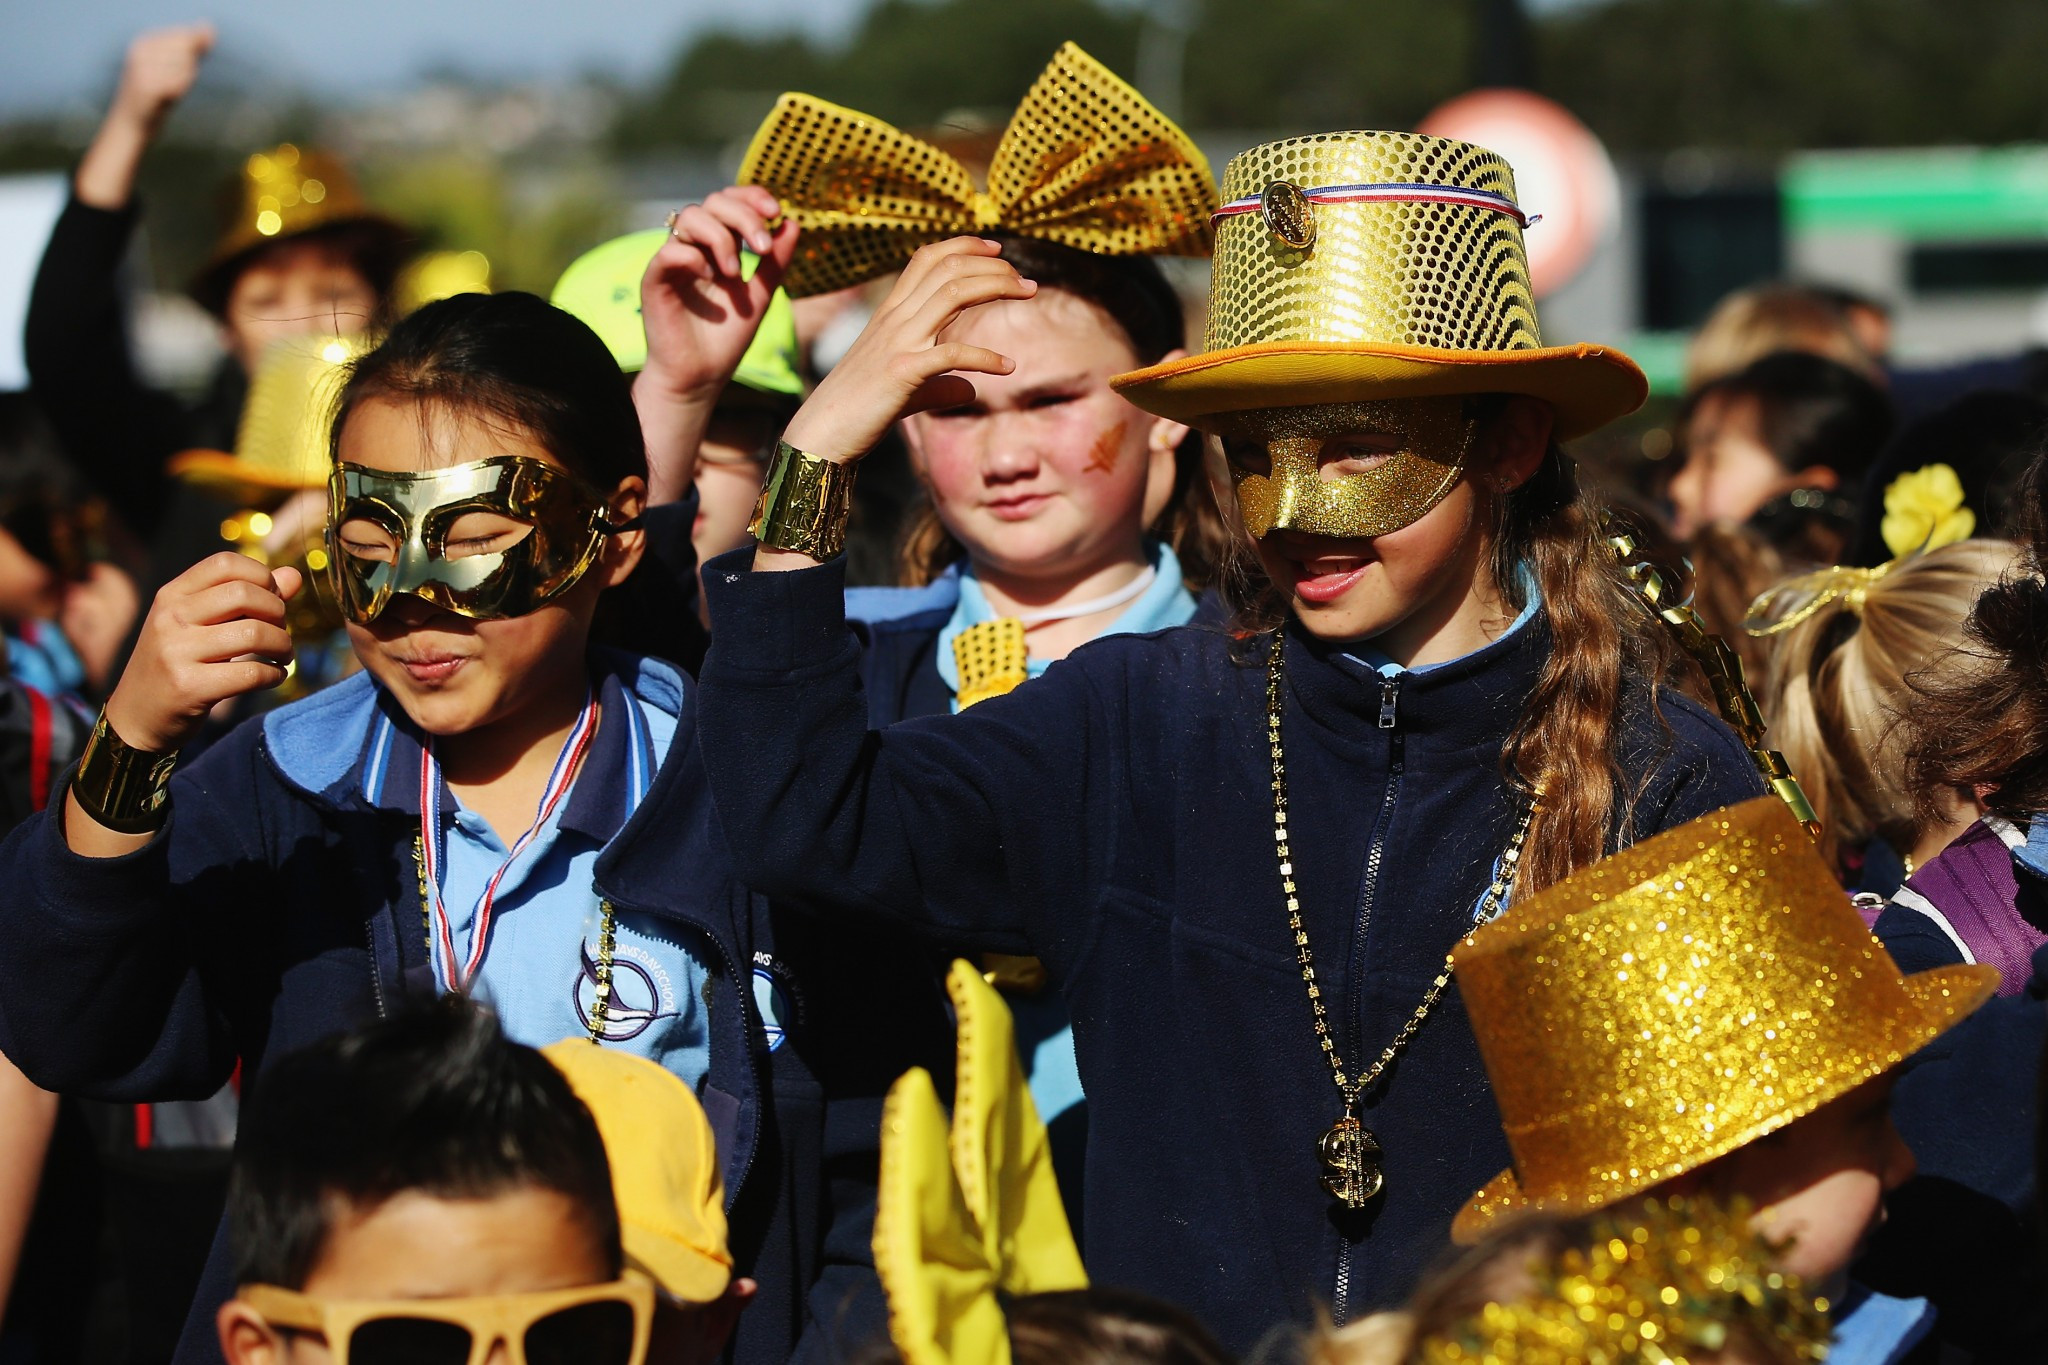 New Zealand shows support for Paralympians on "Spirit of Gold" mufti day